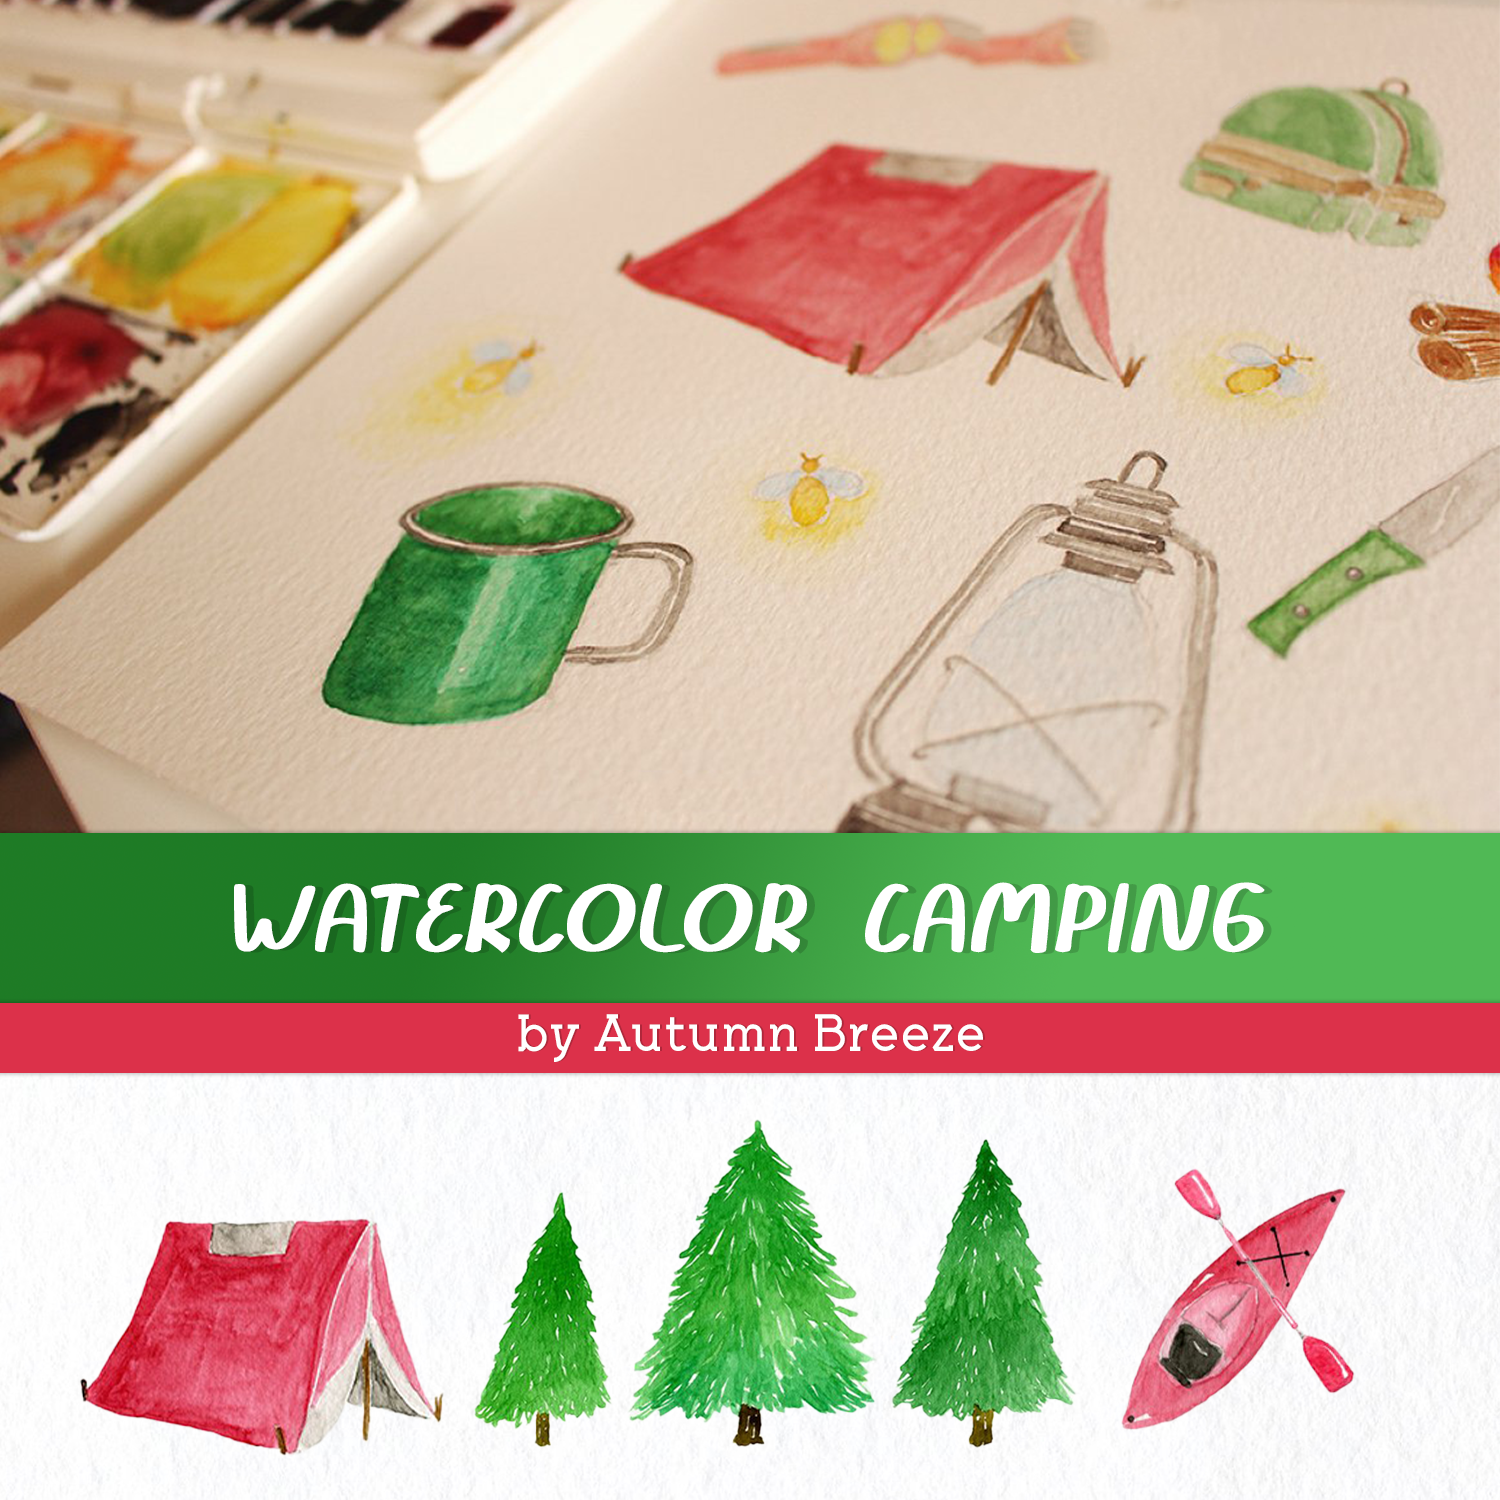 Preview watercolor camping.